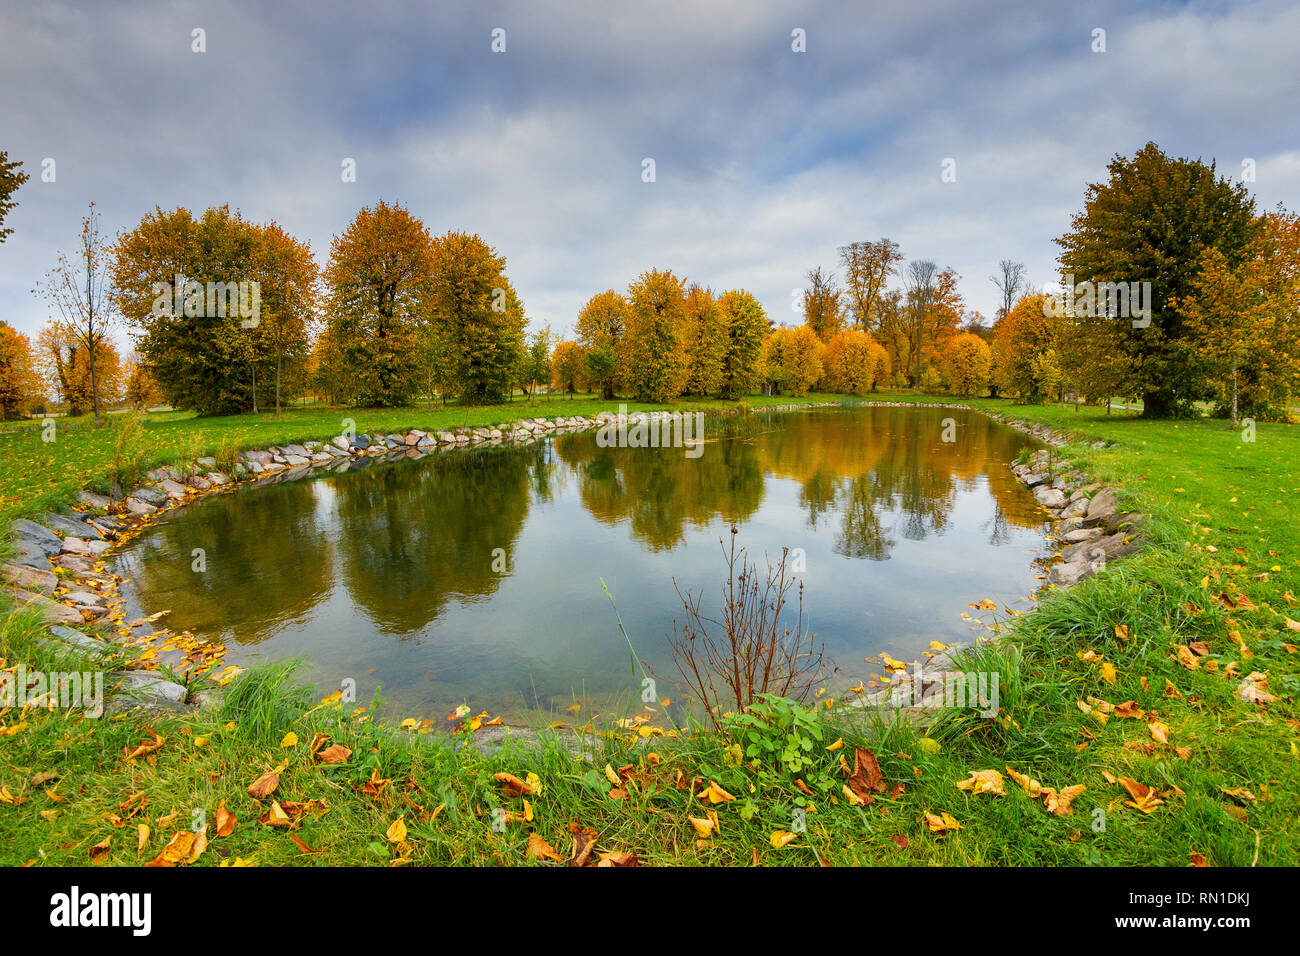 Artificial lake waterscape surrounded by the fall season's scenery in Barockparken (Barok park), Upplands Vasby, STHLM, Sweden Stock Photo